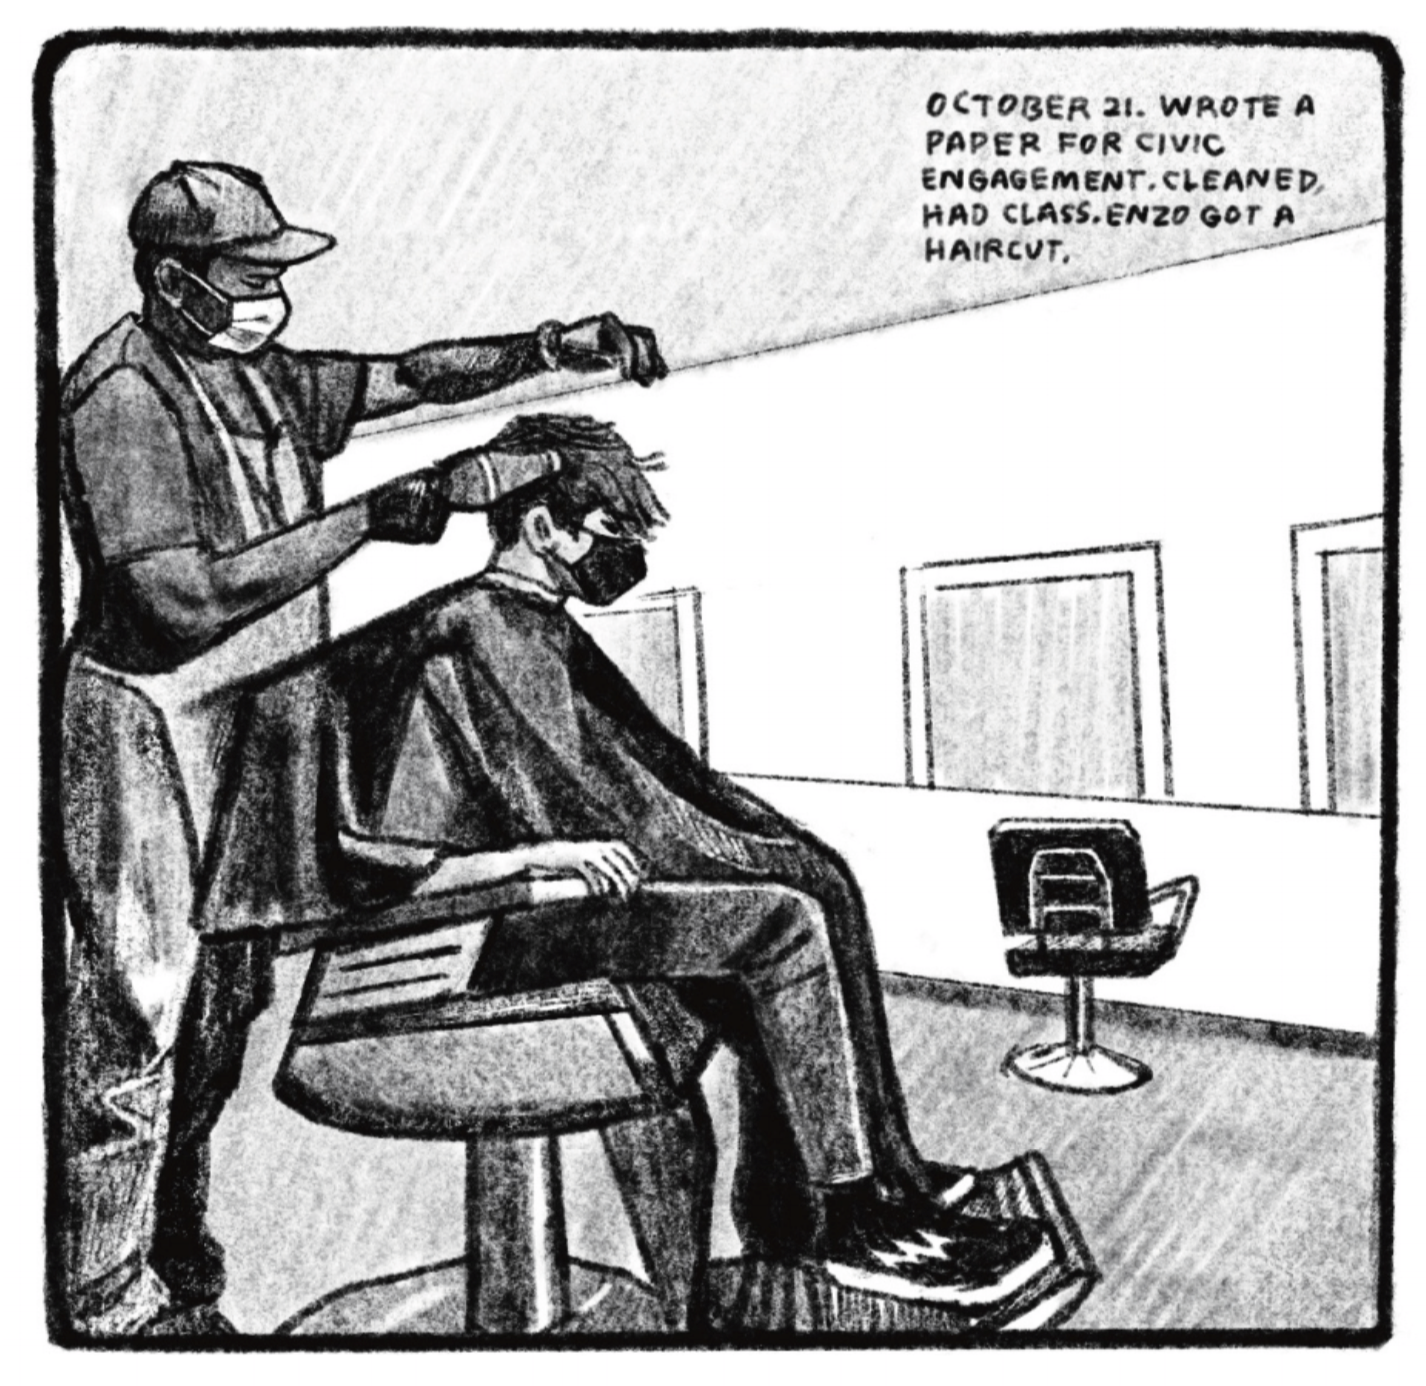 Enzo is getting his hair cut; both he and the barber are wearing masks for Covid. Enzo is wearing a barber cape, jeans, and sneakers; the barber is wearing an apron over a t-shirt and pants. â€œOctober 21. Wrote a paper for civic engagement. Cleaned, had class. Enzo got a haircut.â€